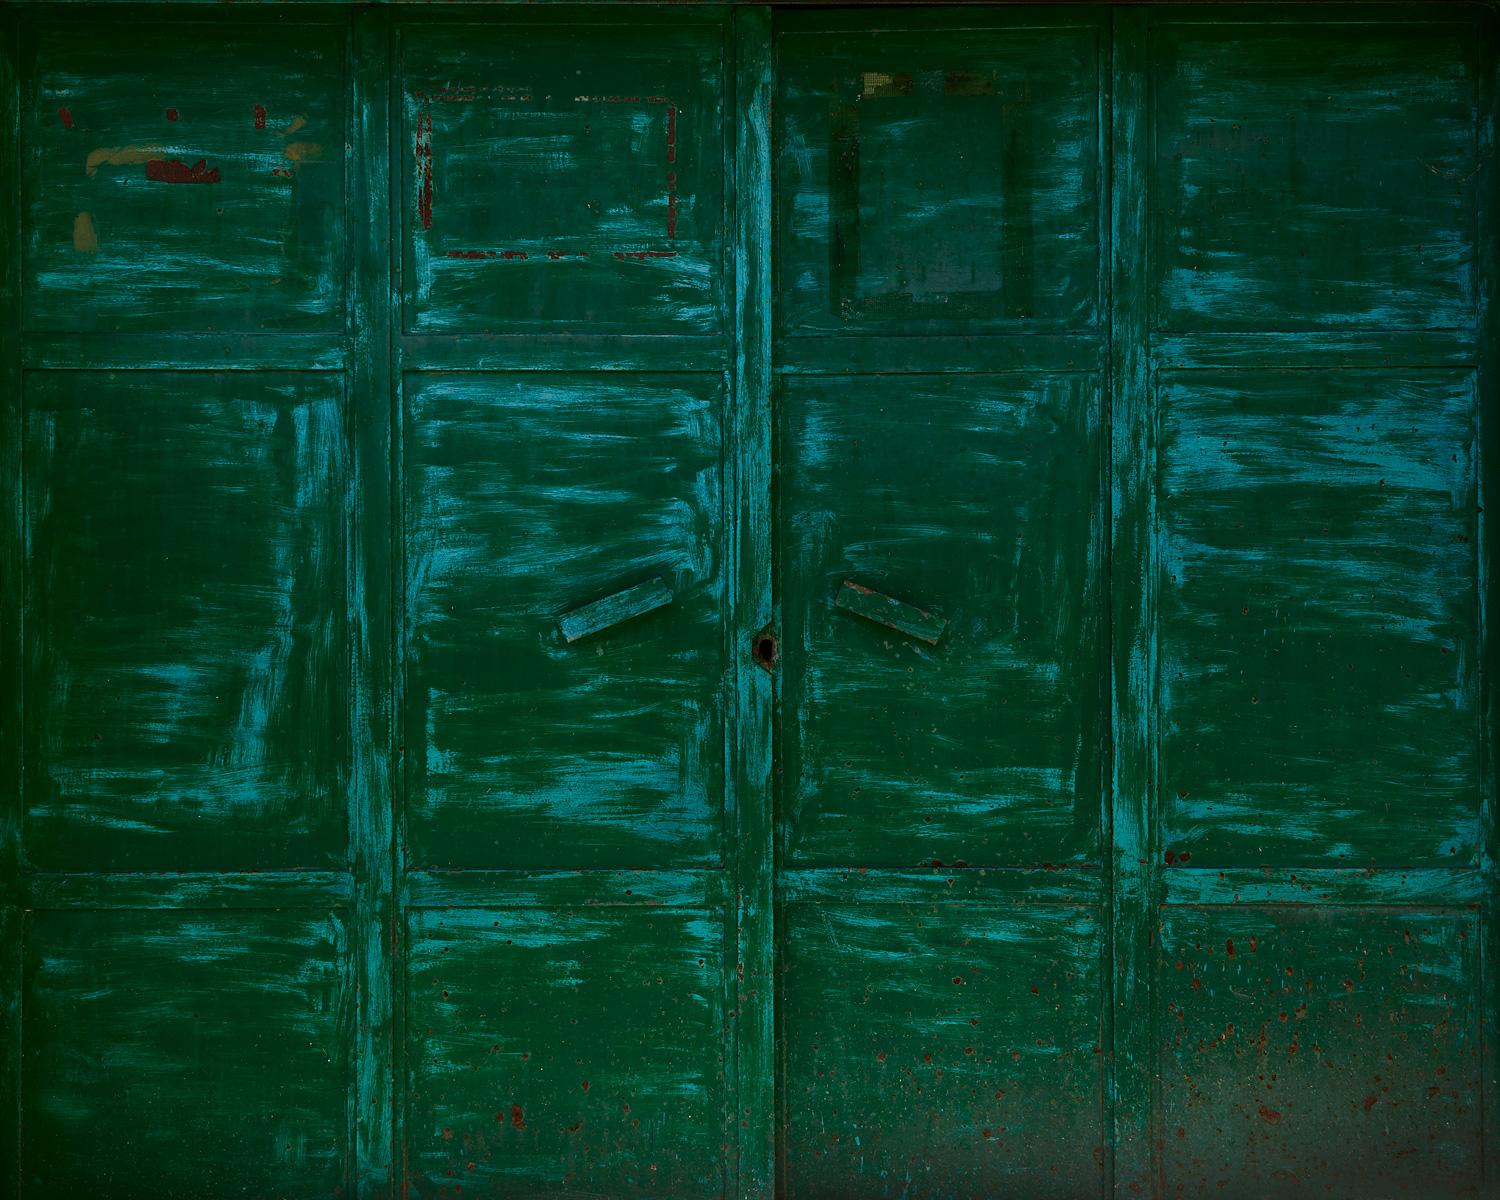 Frank Schott Abstract Photograph - Wallscape VII (Green Door) - abstraction of urban textures and palimpsest colors